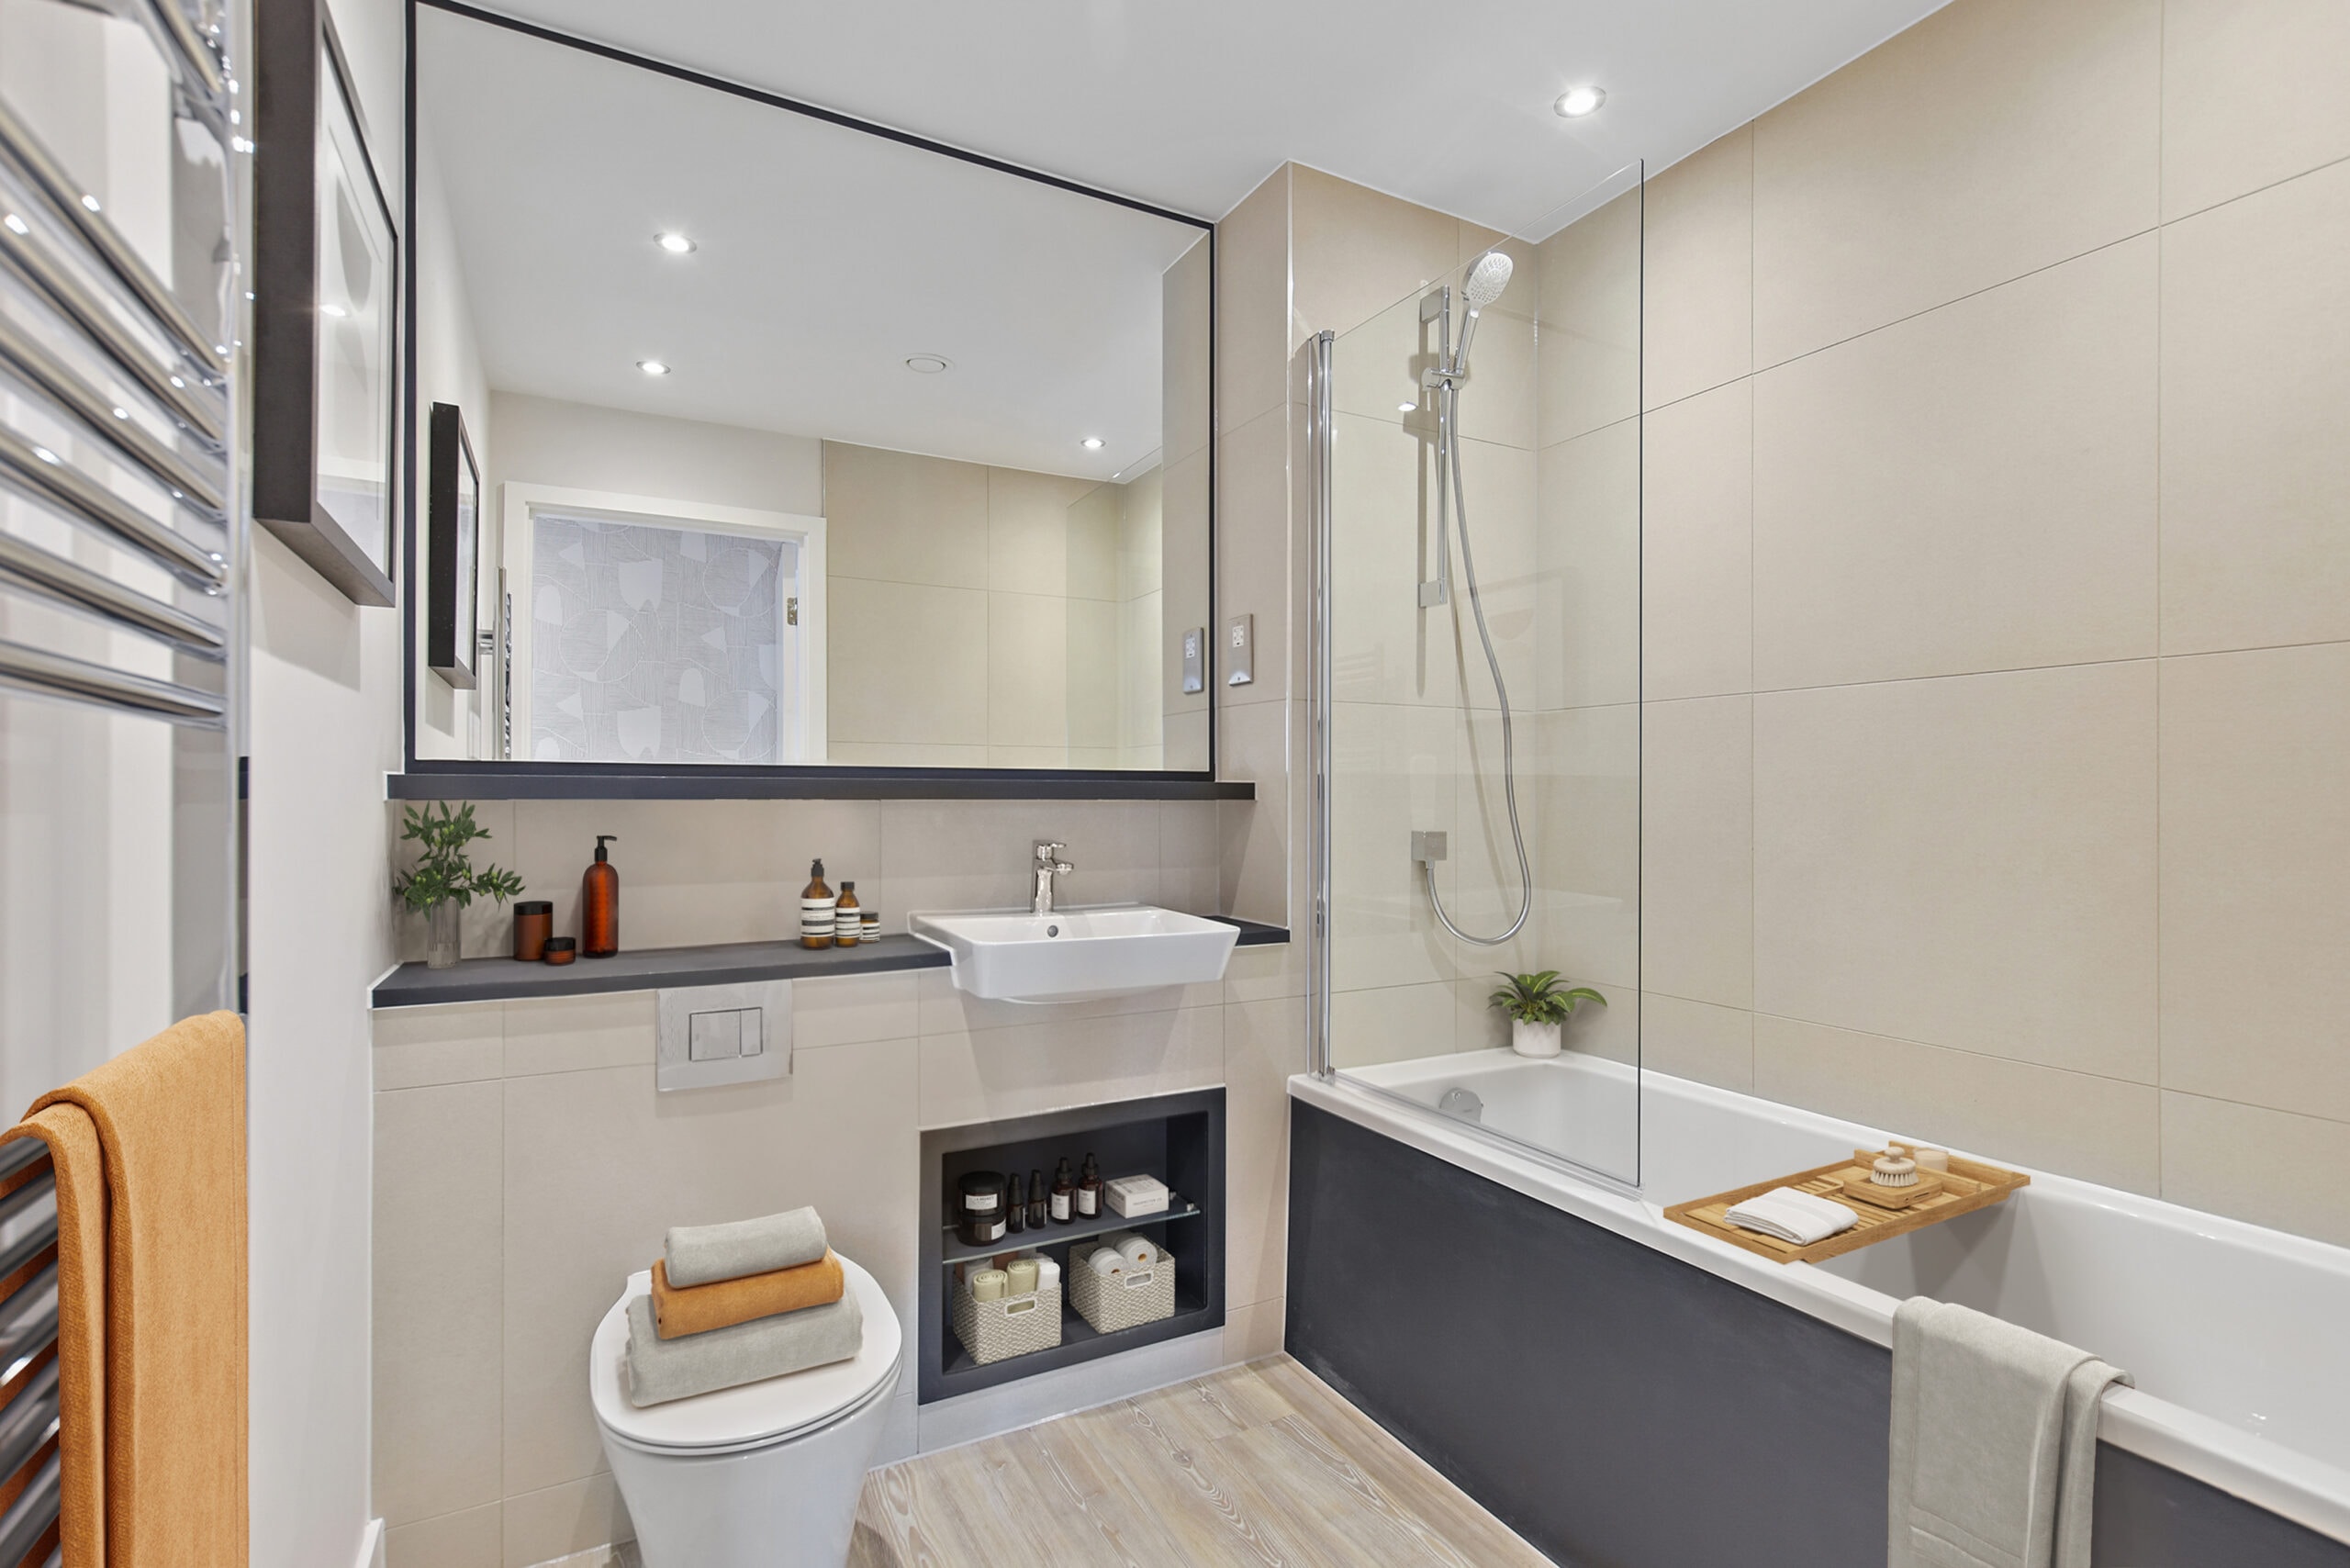 Image of a bathroom at Lampton Parkside in Hounslow, from NHG Homes - Start your property journey on Share to Buy!